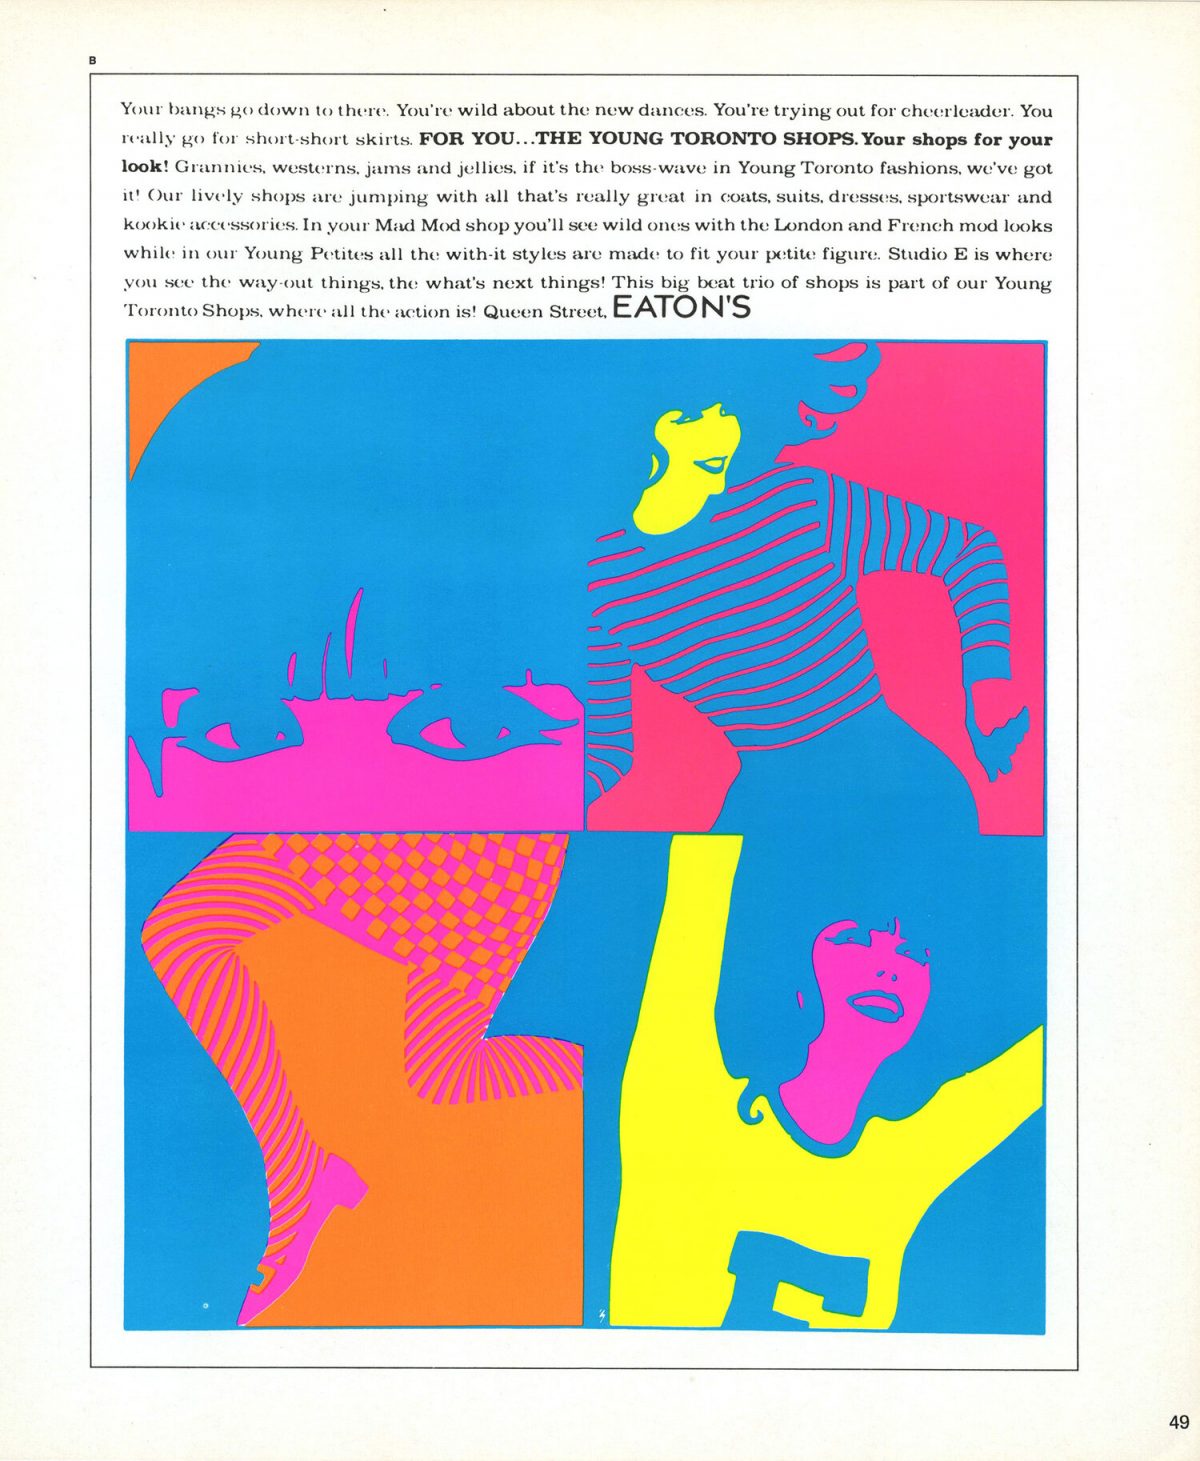 THE DAY-GLO DESIGNERS GUIDE 1960s